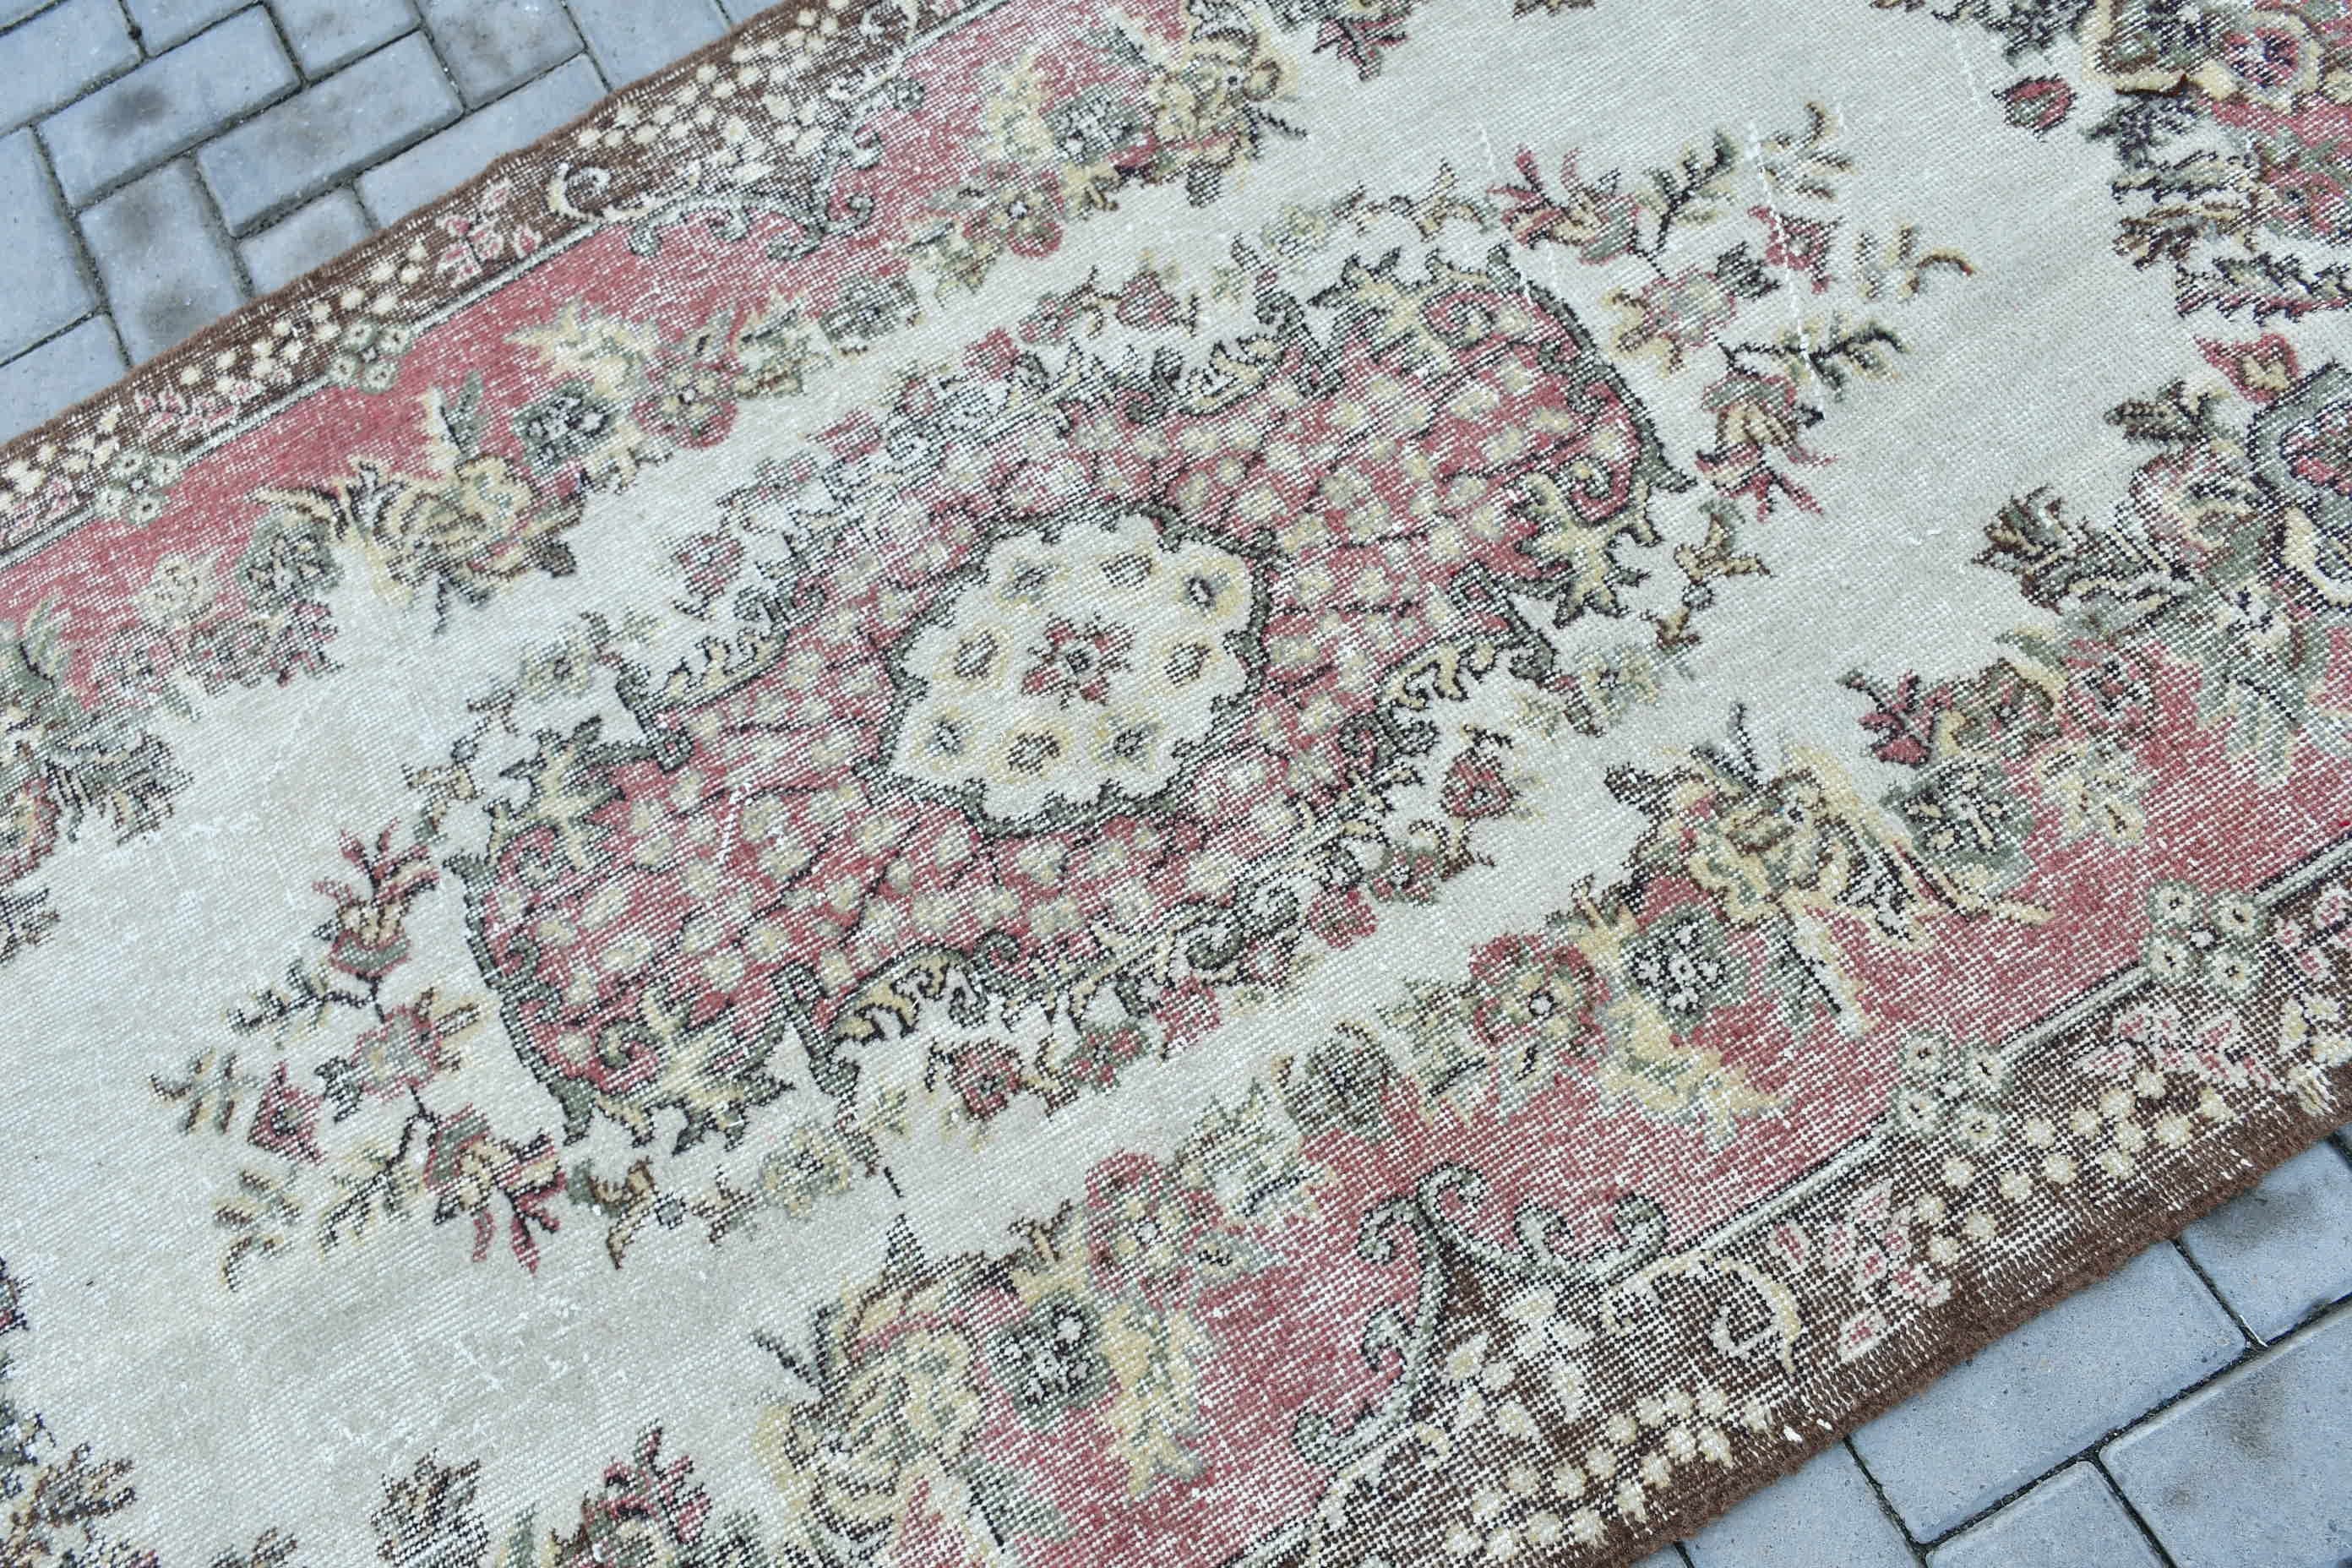 Dining Room Rug, Red Antique Rug, 4x7.2 ft Area Rug, Vintage Rug, Cute Rugs, Rugs for Area, Bedroom Rug, Turkish Rugs, Home Decor Rugs